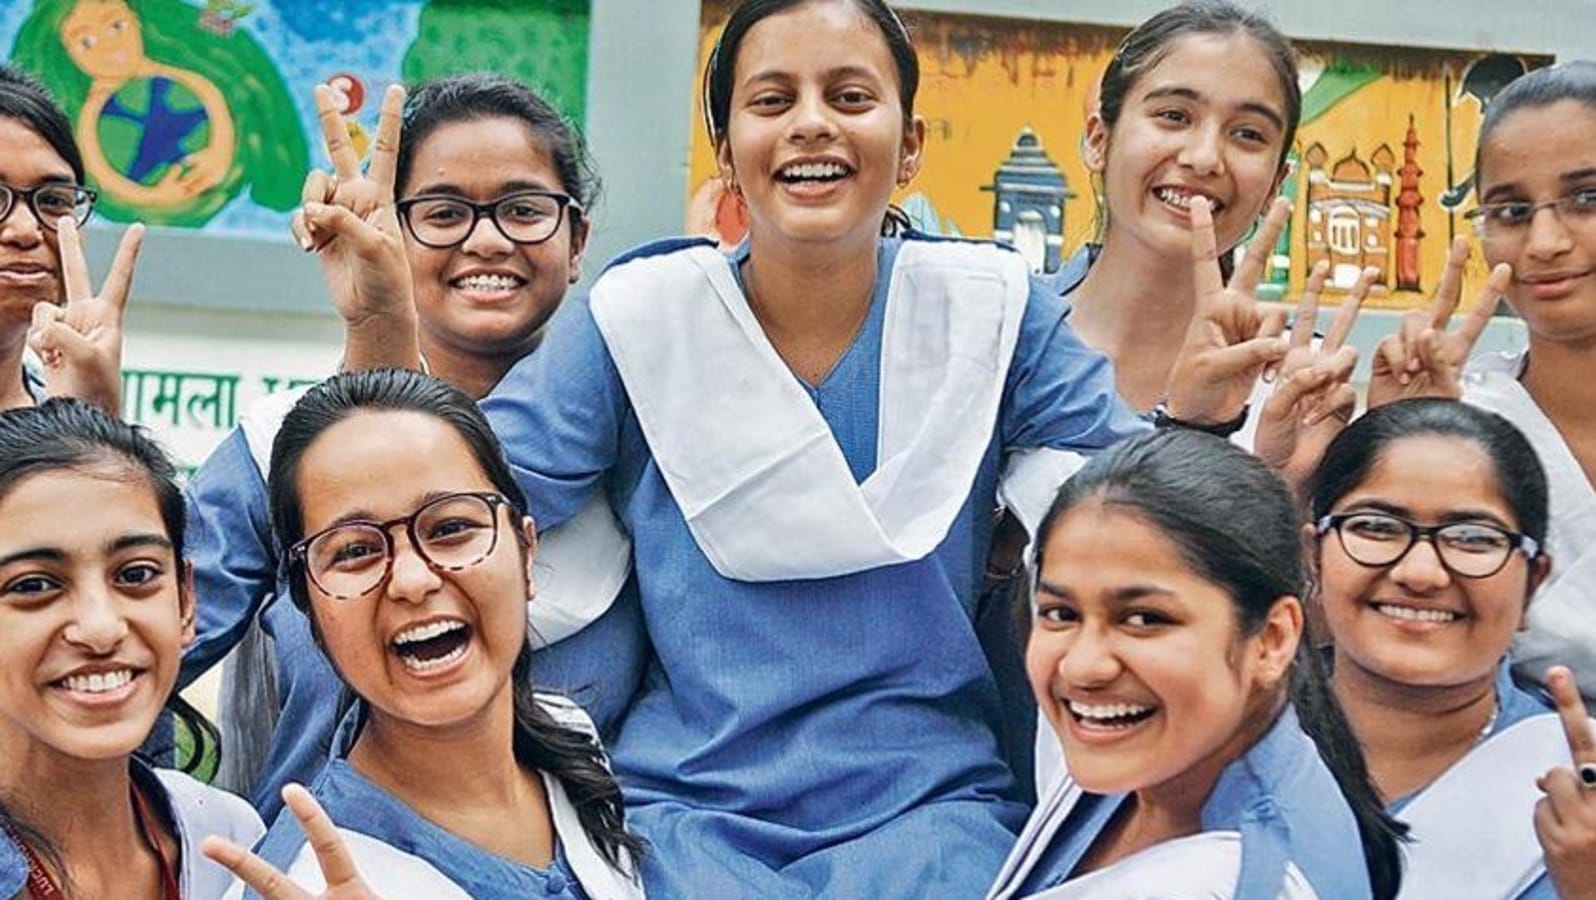 JKBOSE 12th Result 2021: Beating all odds, girl secures 98.06% in Class 12